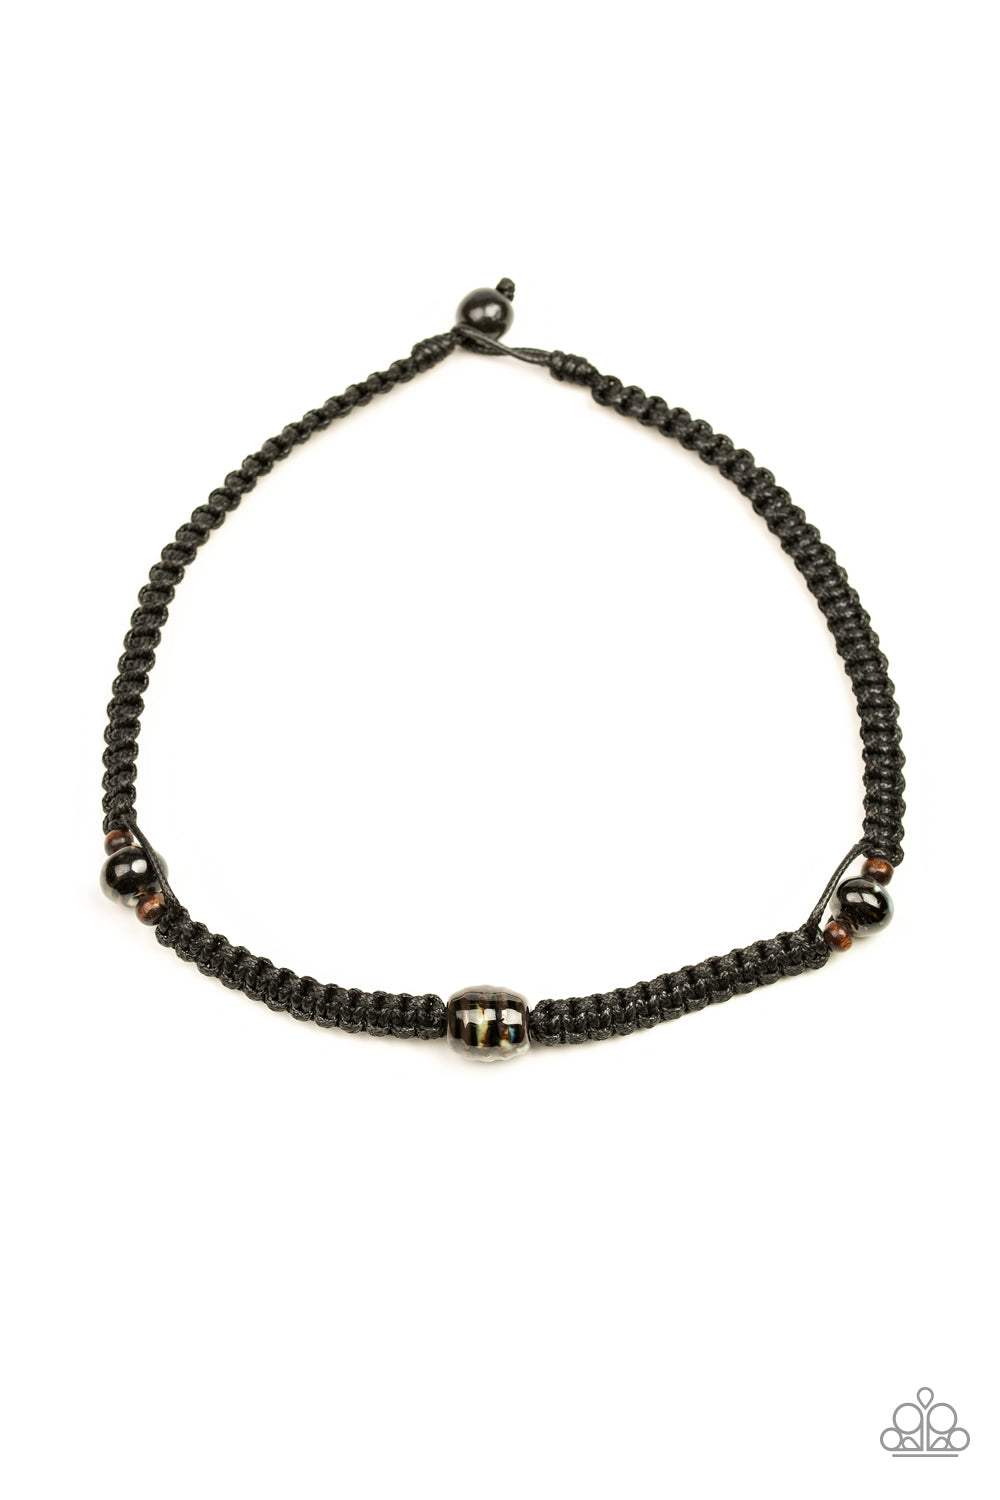 Paparazzi Urban Collection necklace - Rate Of Climb - Black